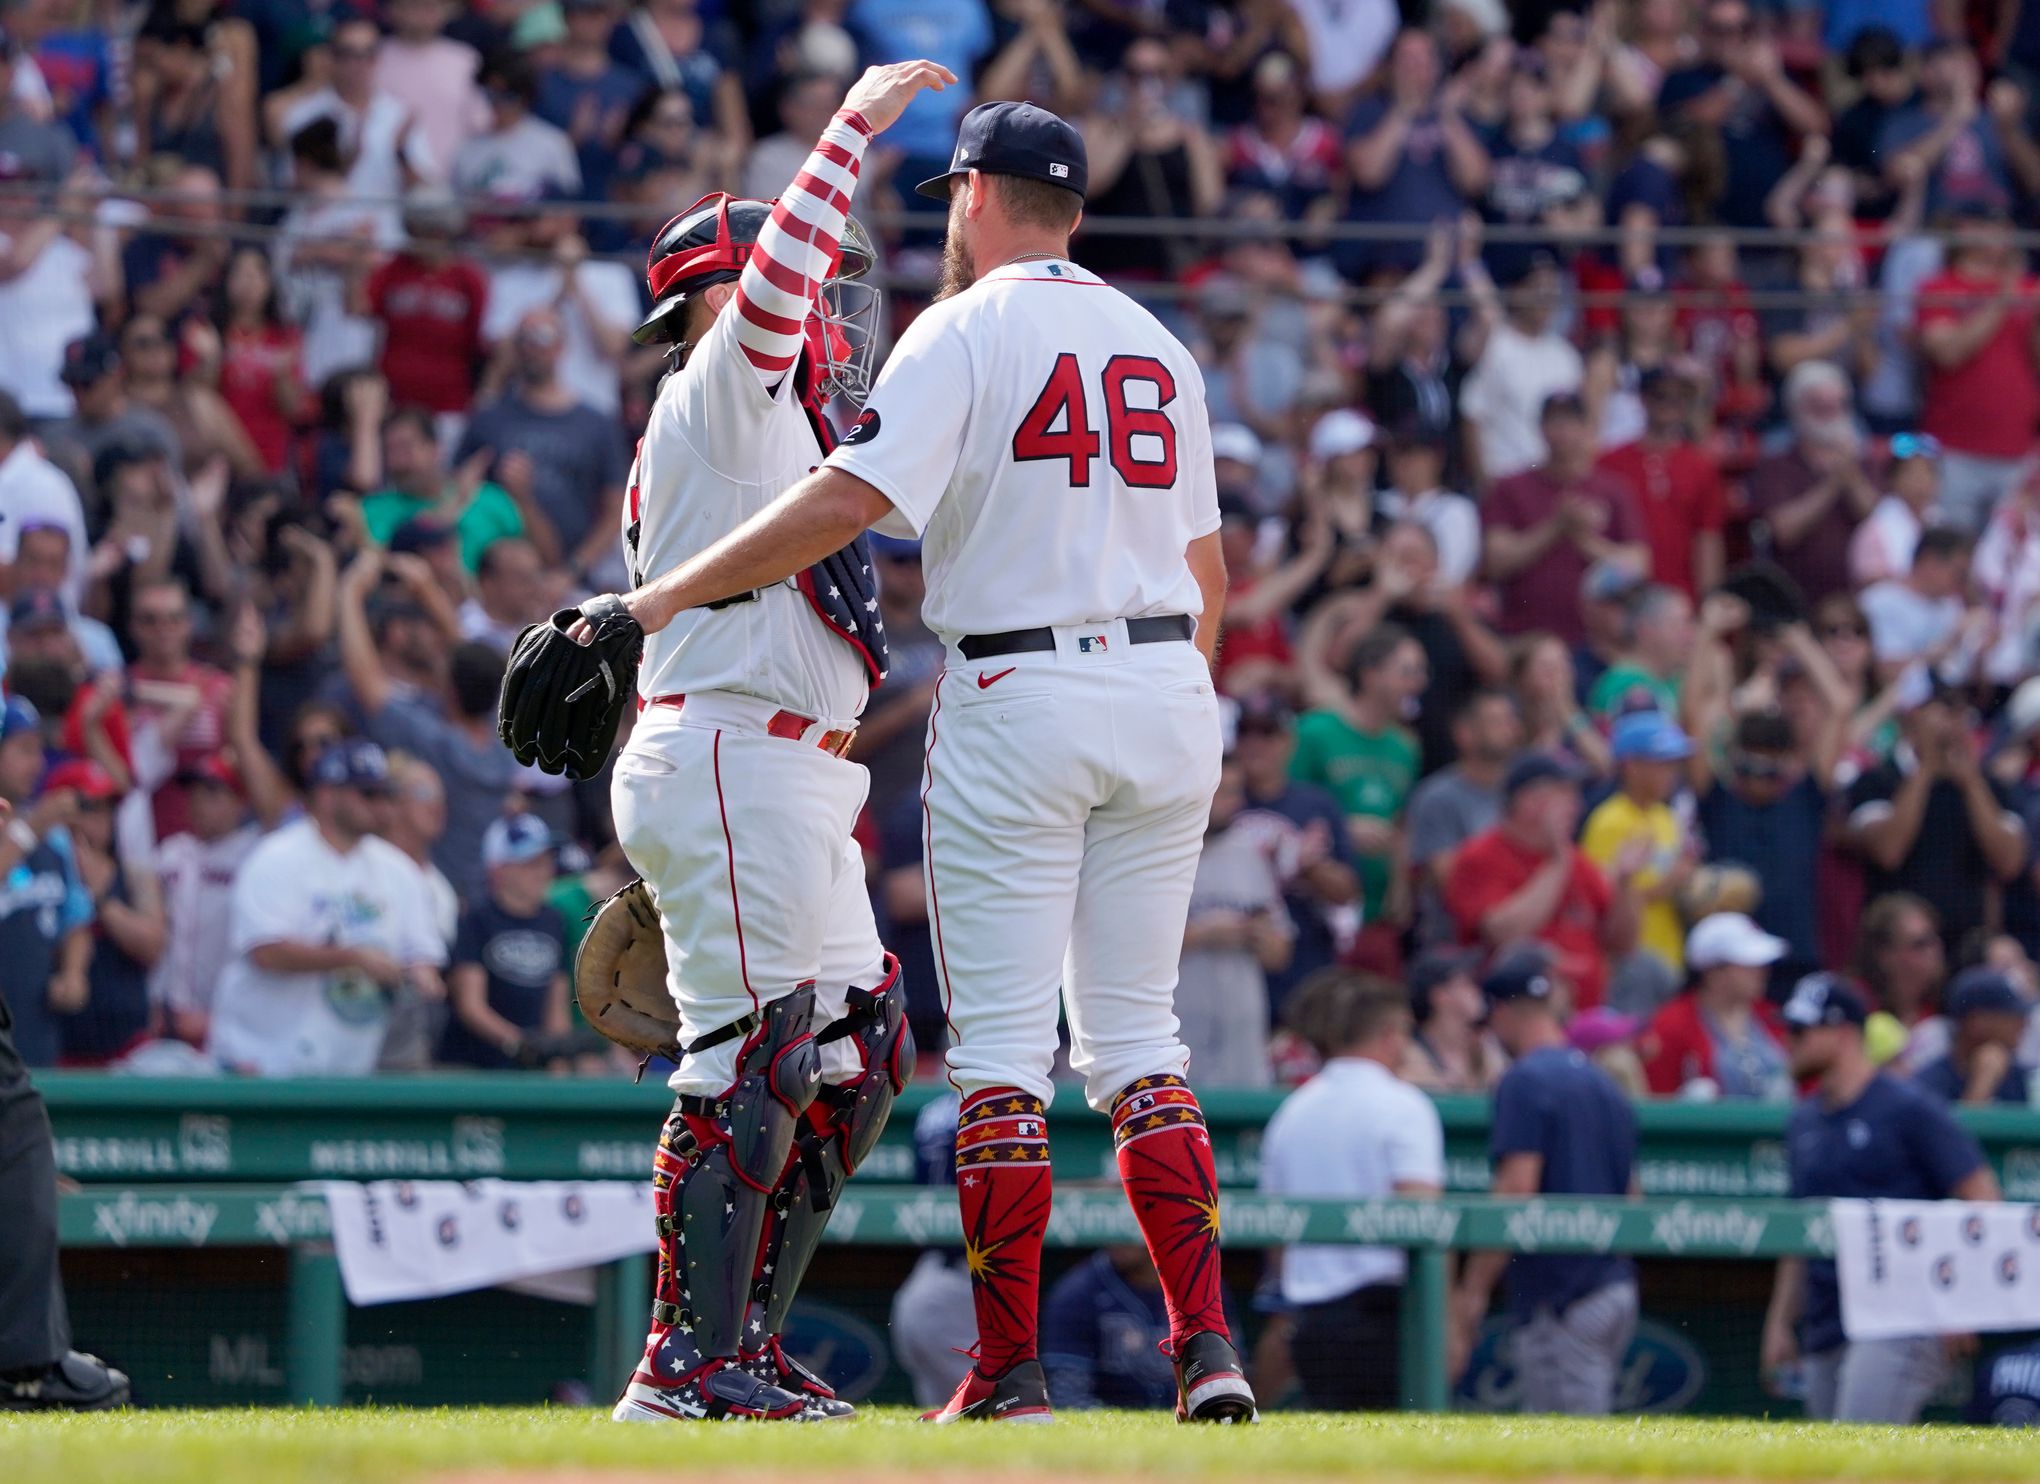 Red Sox win 8th straight on Fourth of July, beat Rays 4-0